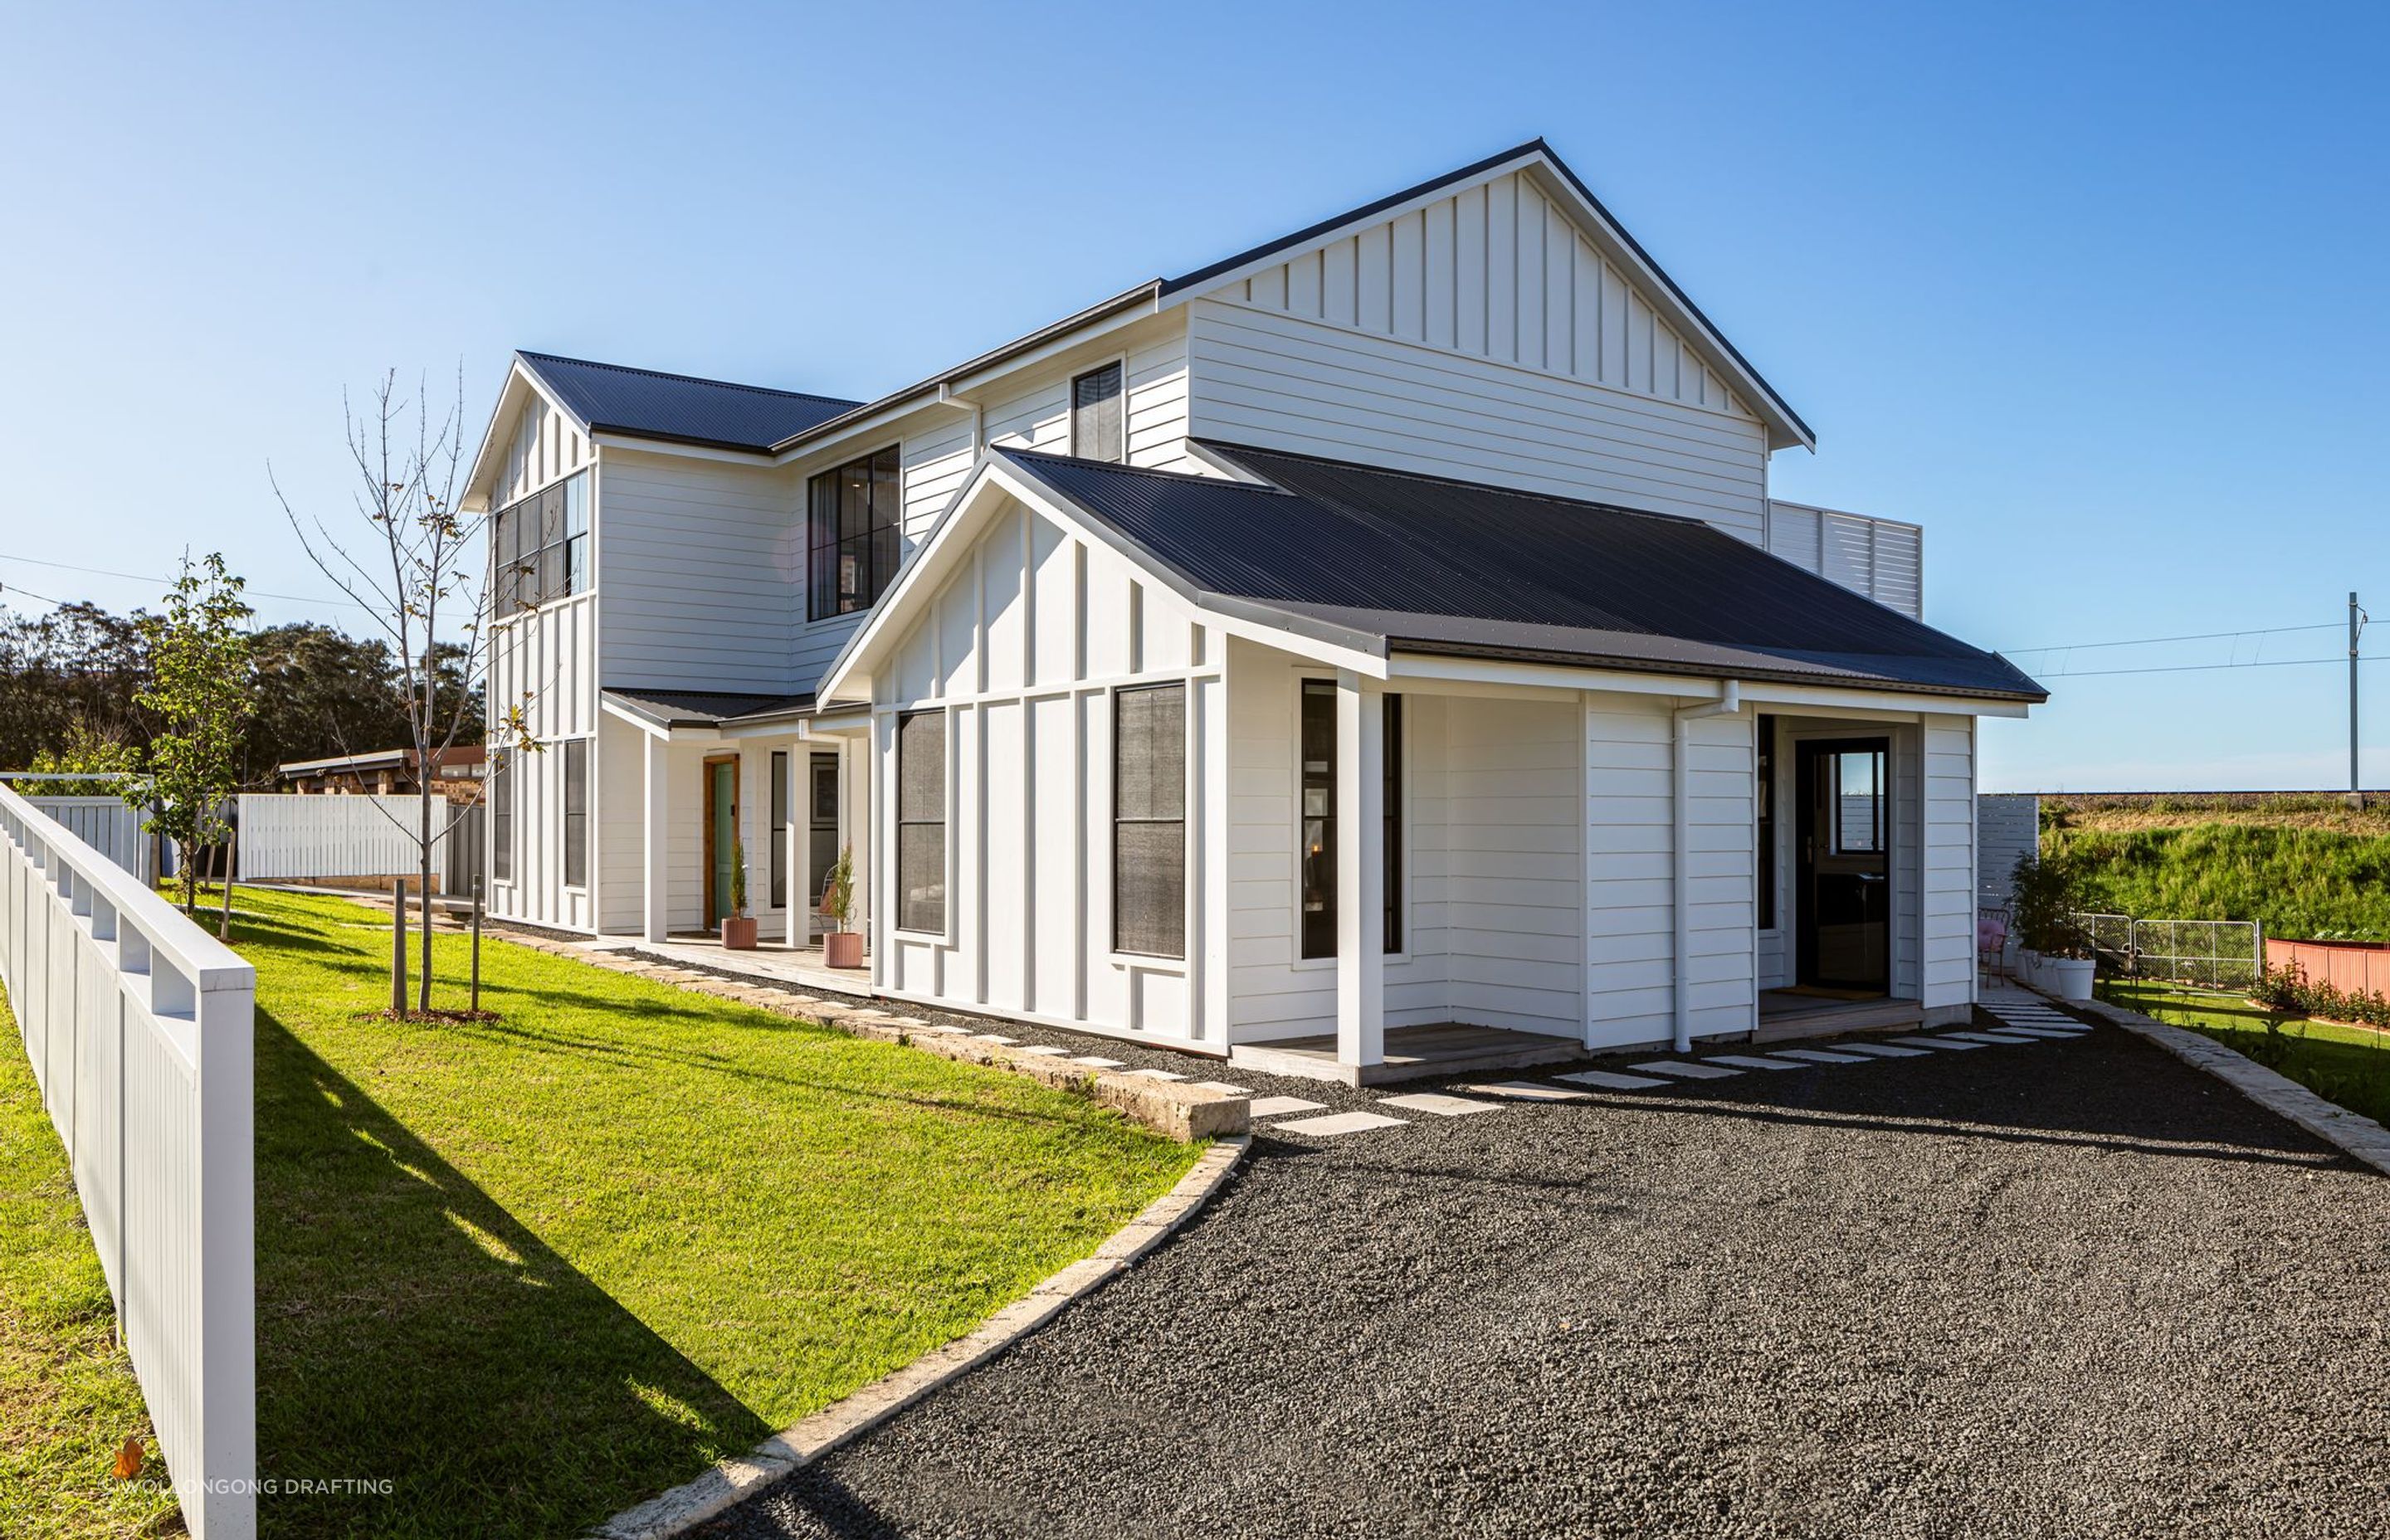 Featured Project: North Kiama Drive by Wollongong Drafting